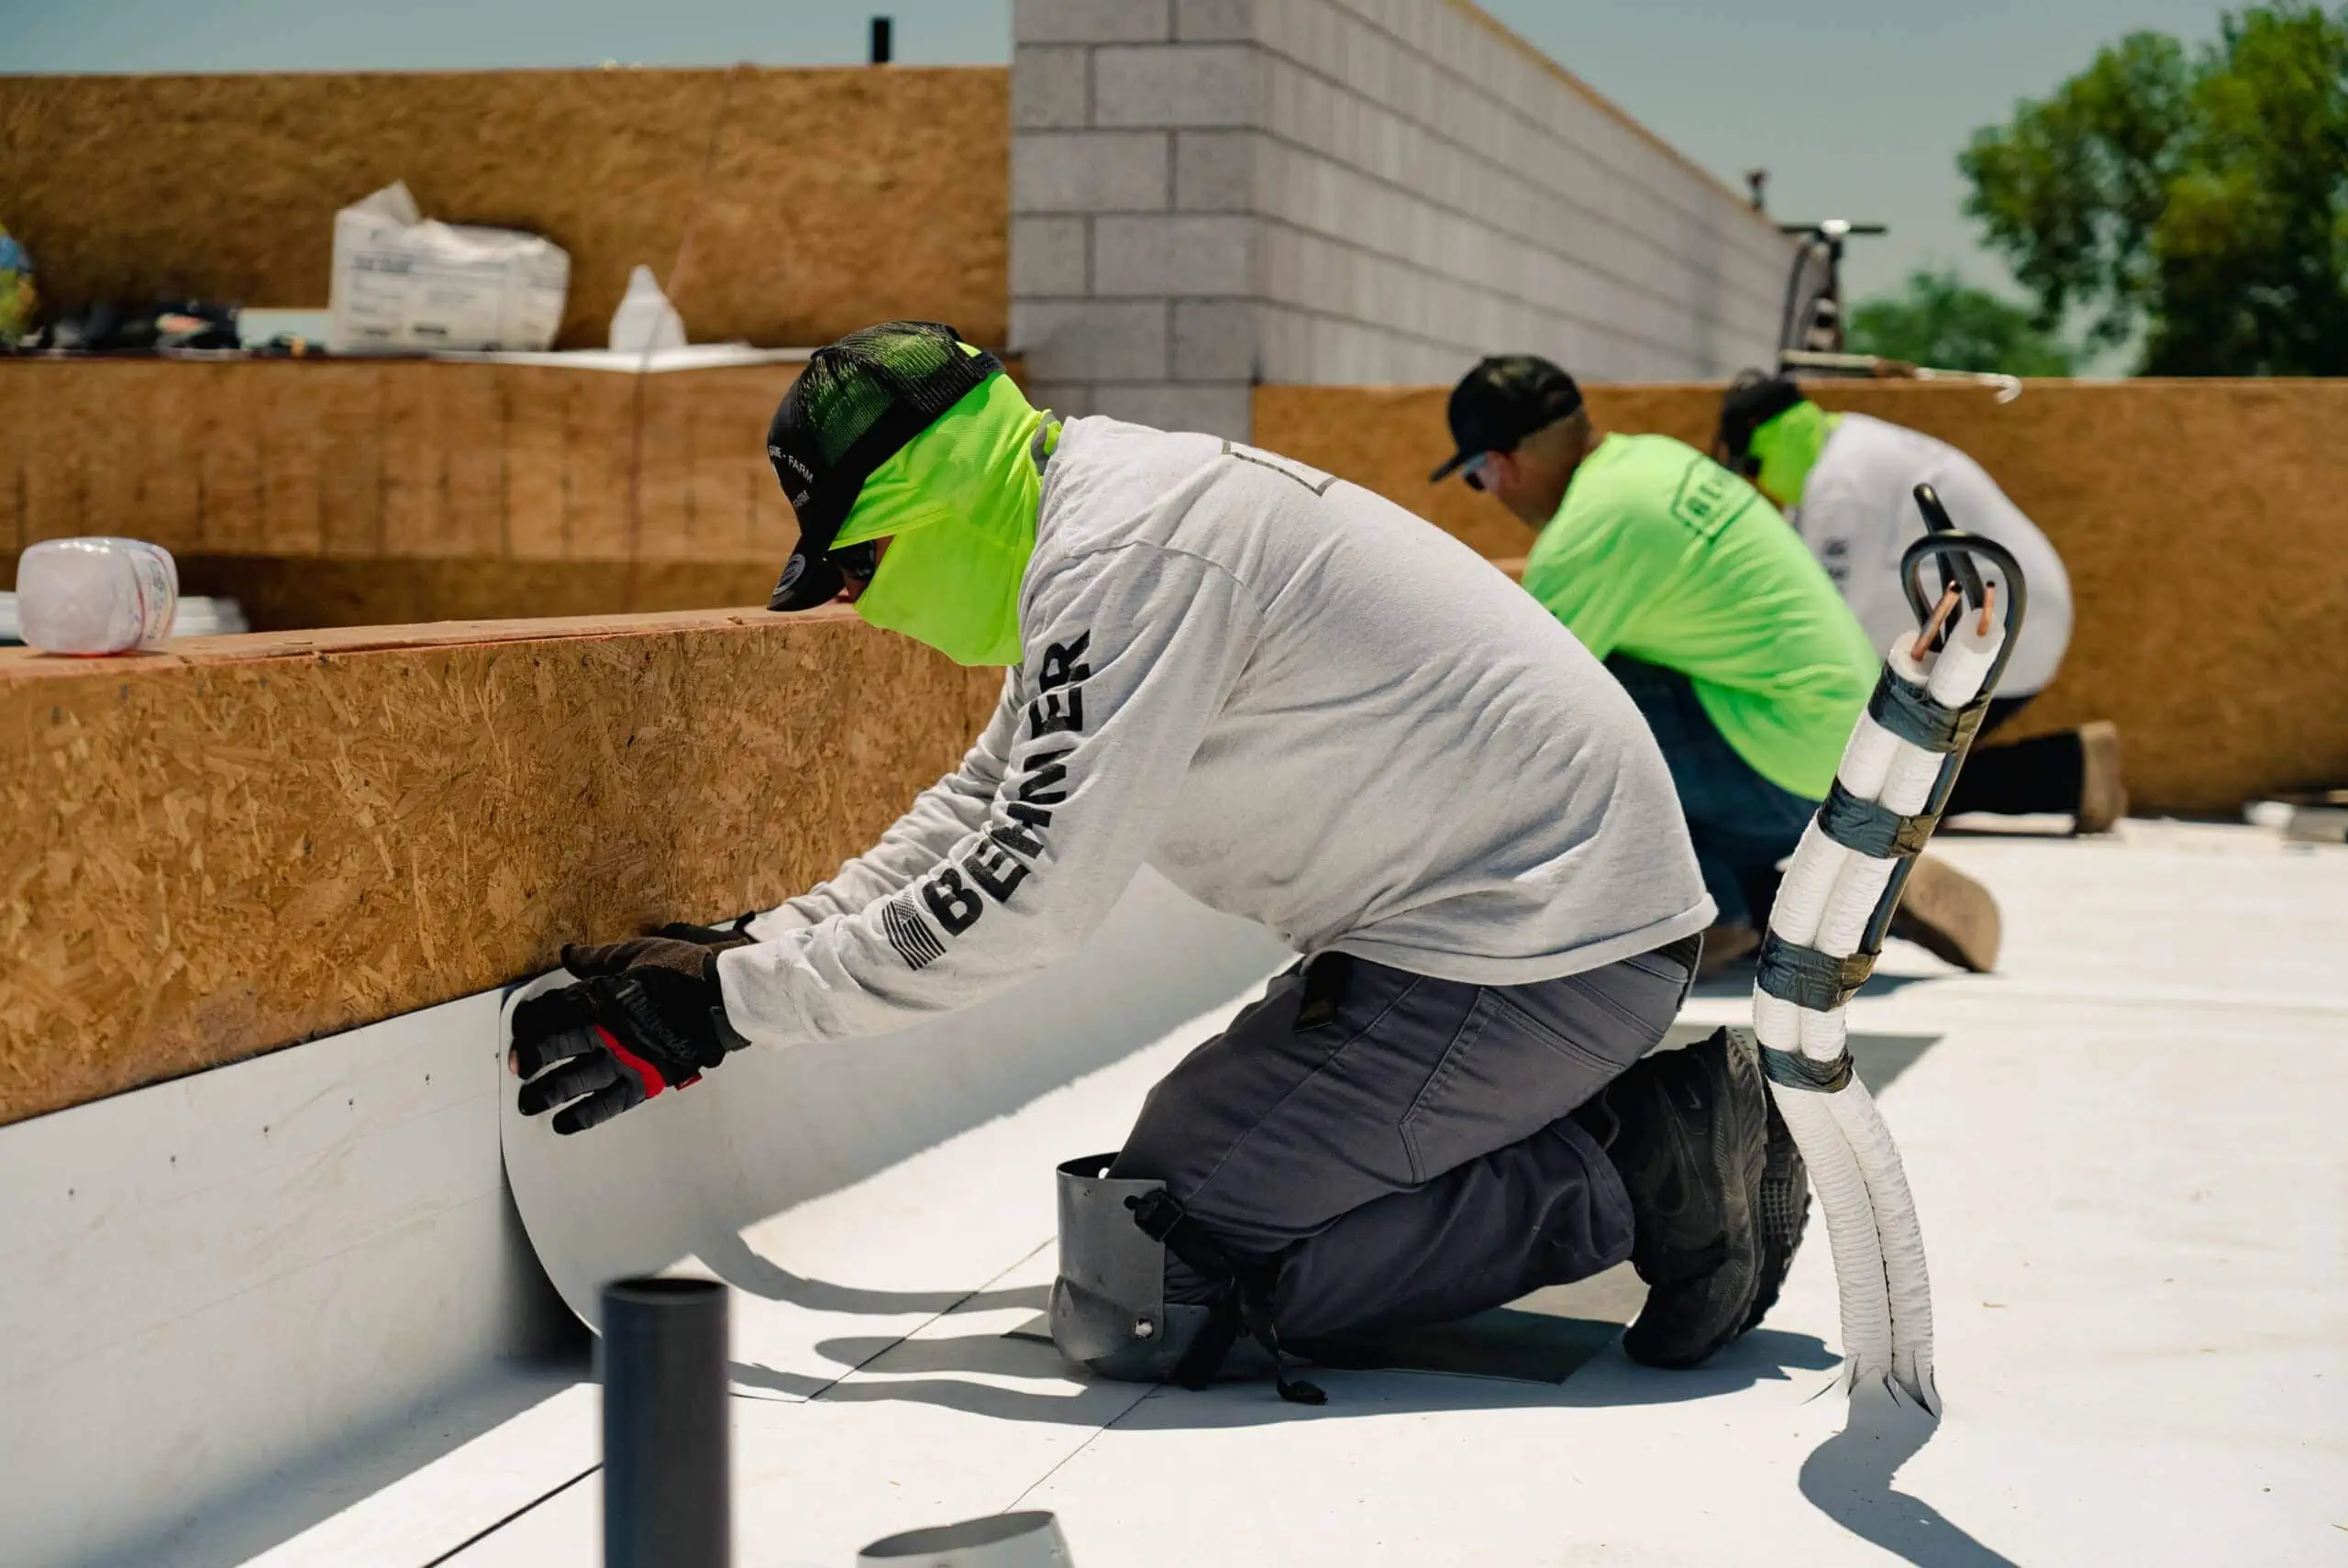 beher roofing company employees working commercial roofing services in gilbert az